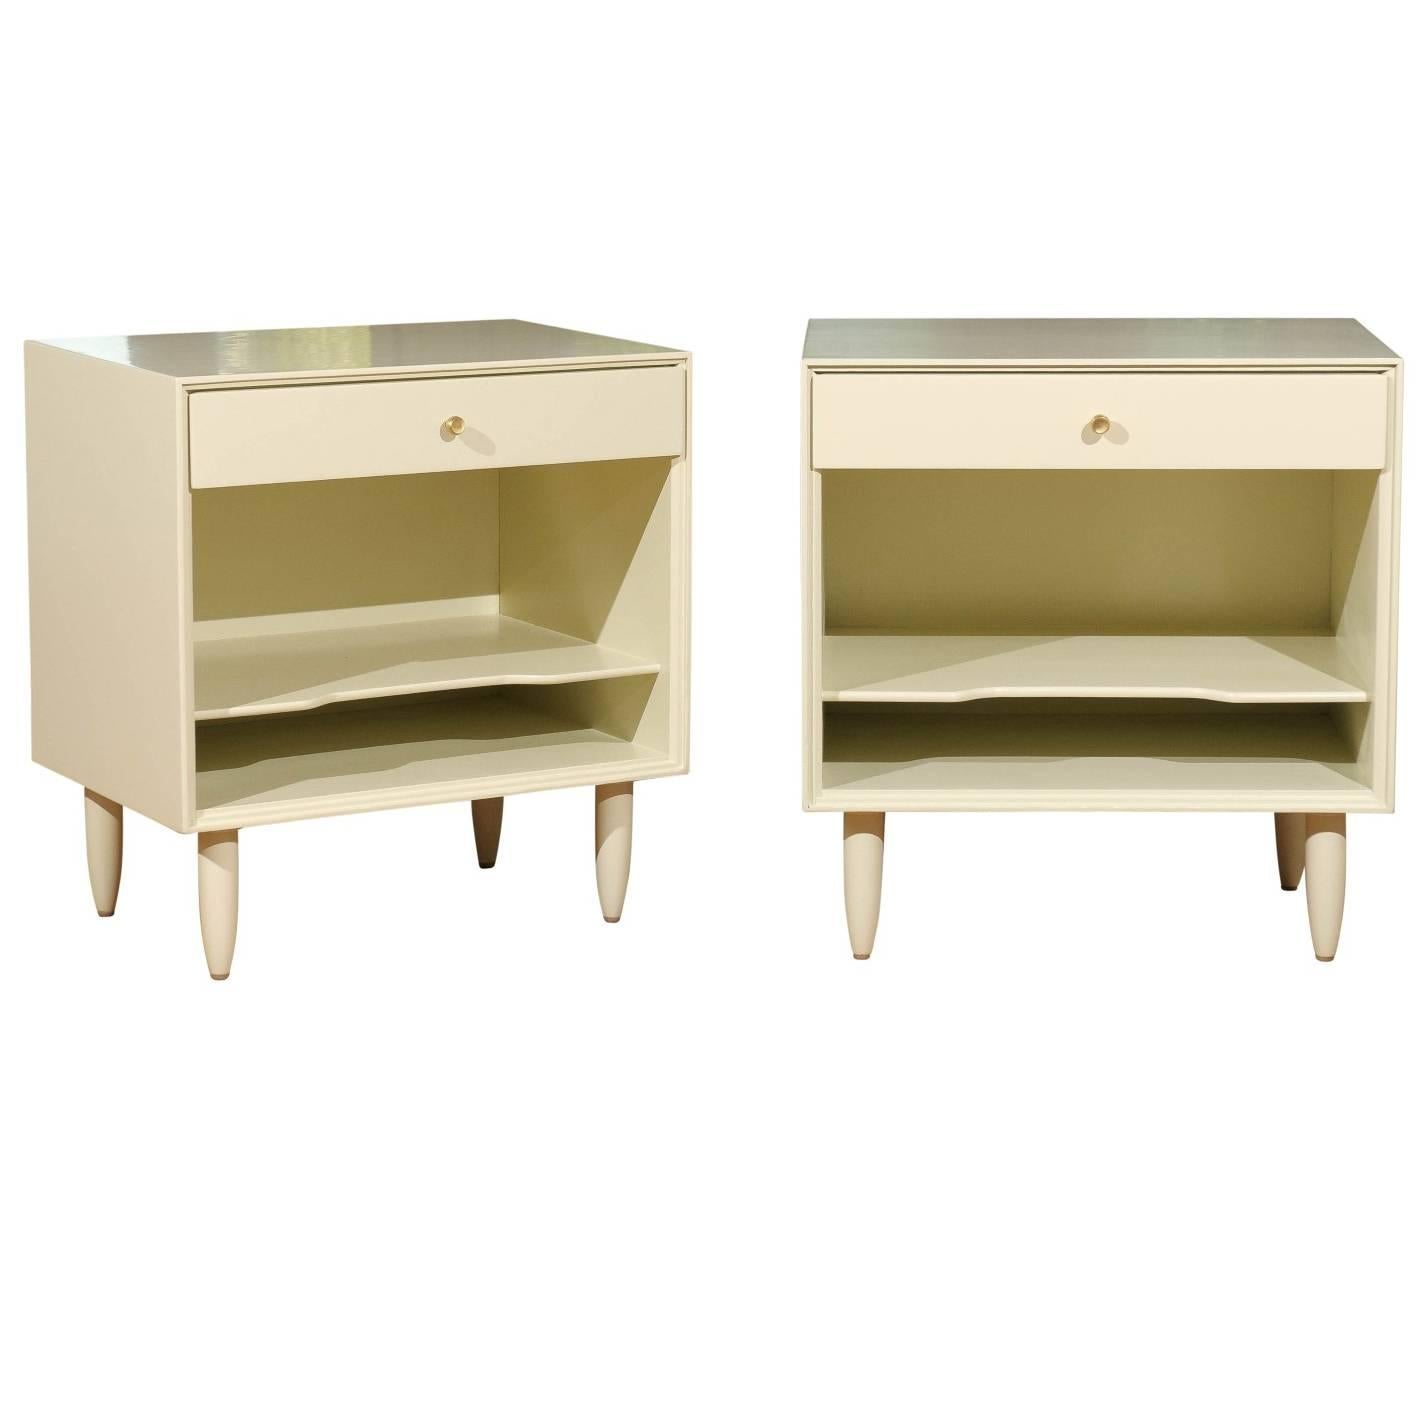 Beautiful Restored Pair of Modern End Tables by John Stuart in Cream Lacquer